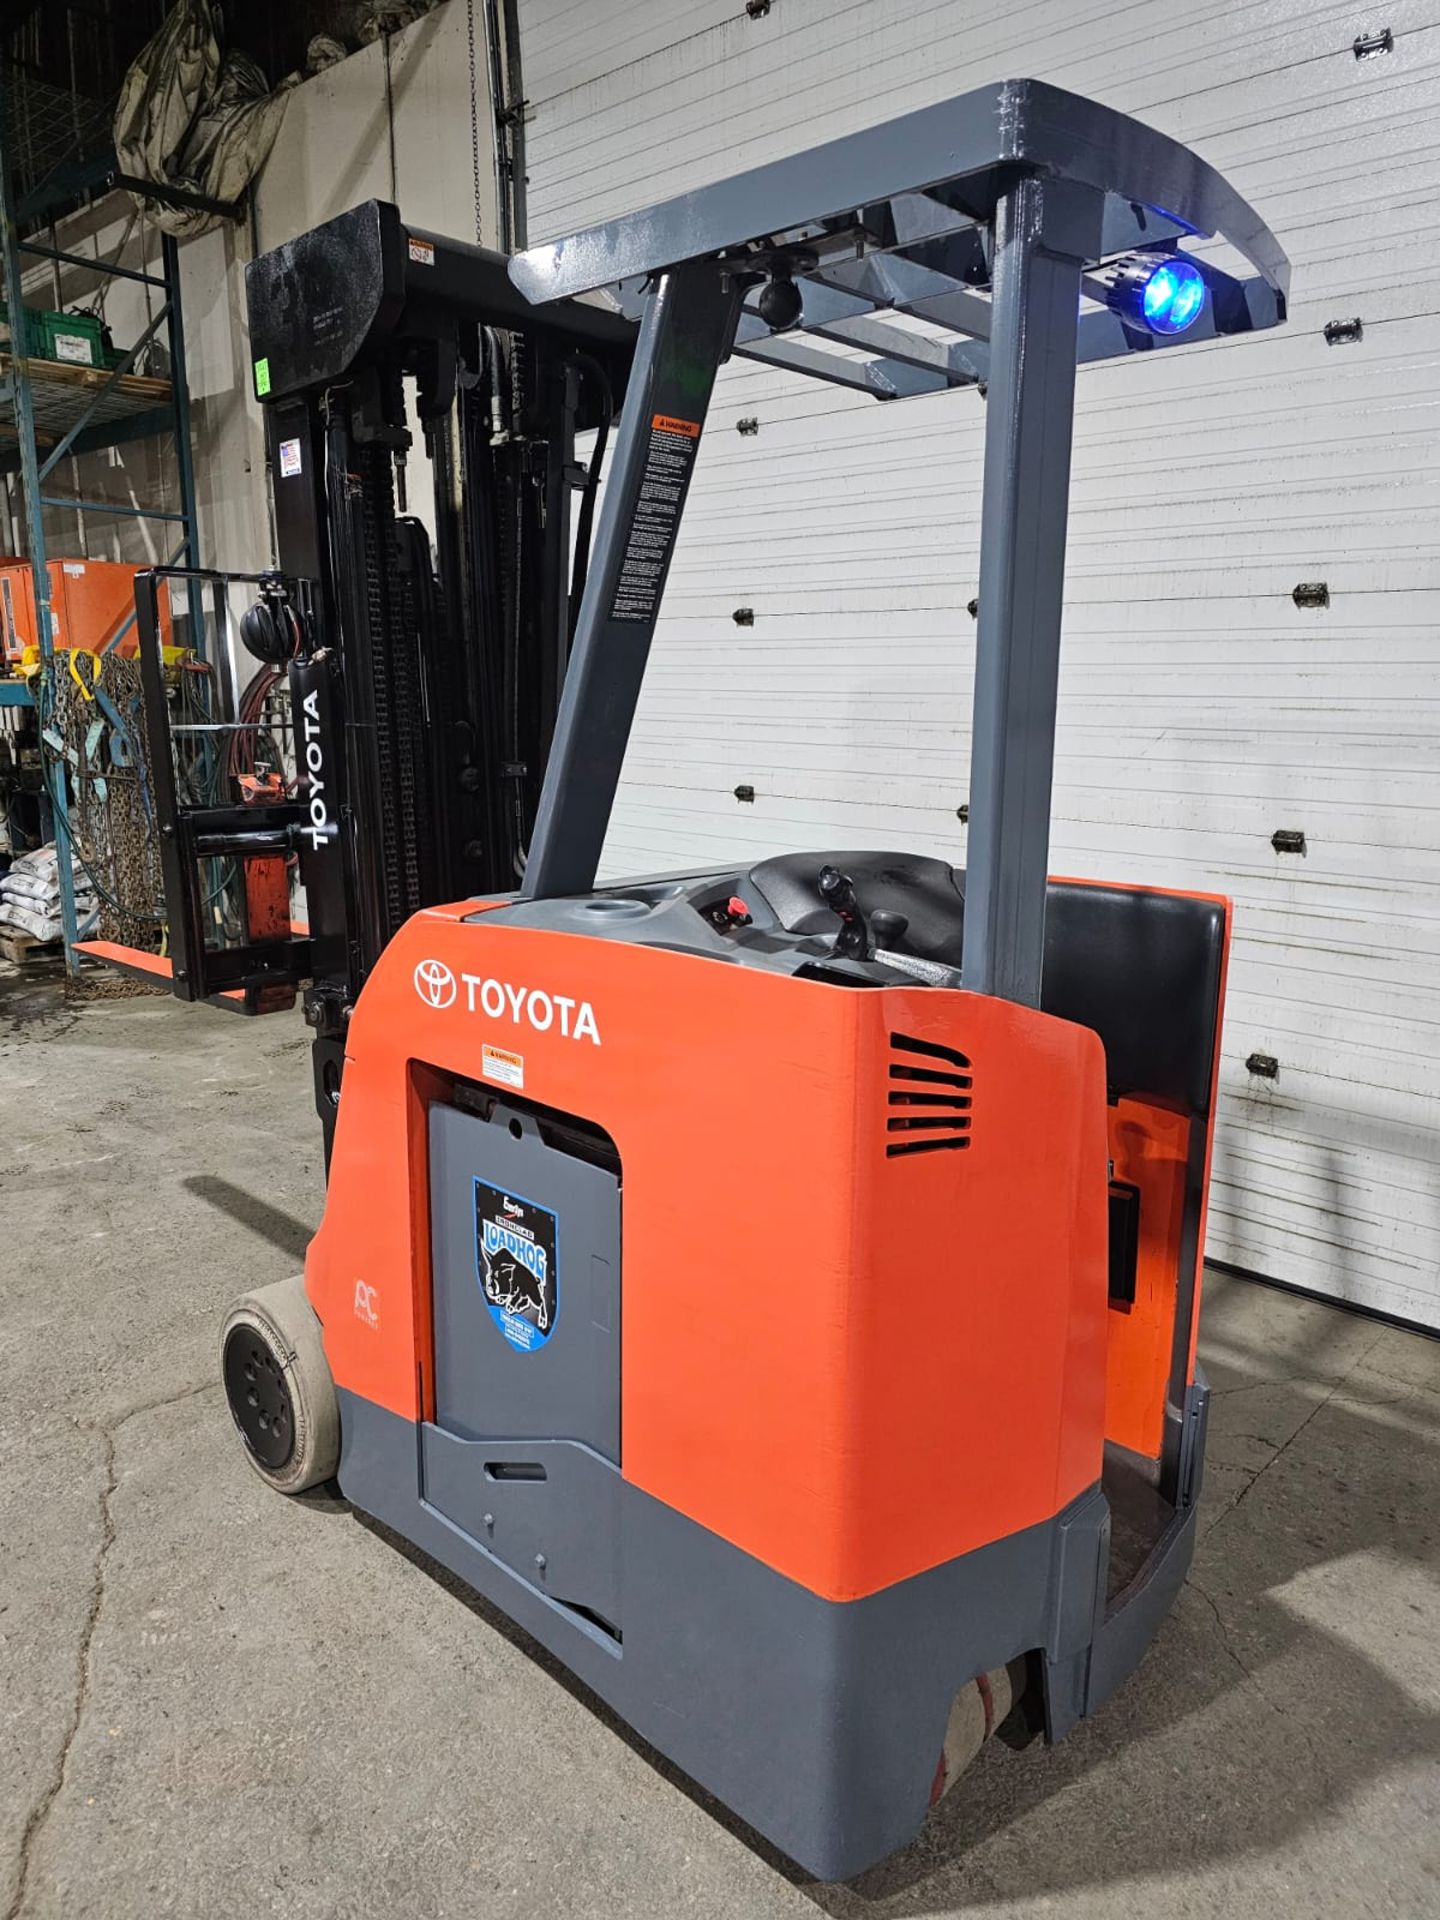 2017 Toyota 4,000lbs Capacity Electric Forklift with 4-STAGE Mast, 276" load height sideshift, 36V - Image 2 of 7